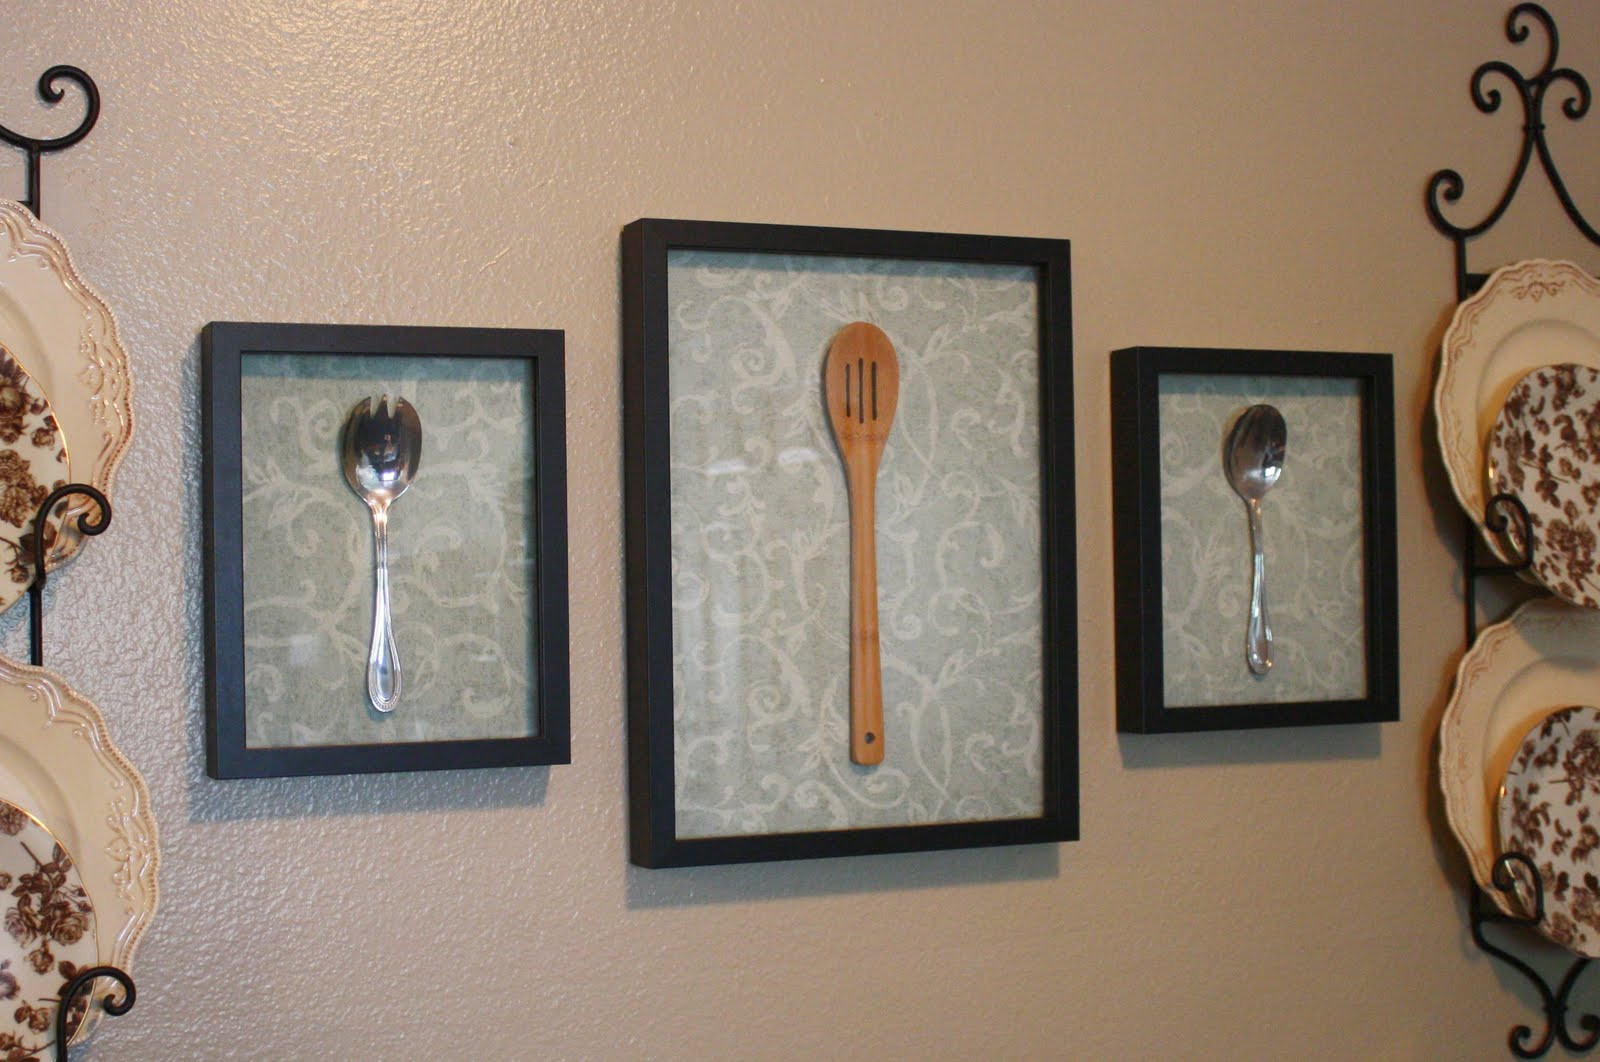 Wall Art For The Kitchen
 bayberry creek Crafter DIY Wall Art for the Kitchen